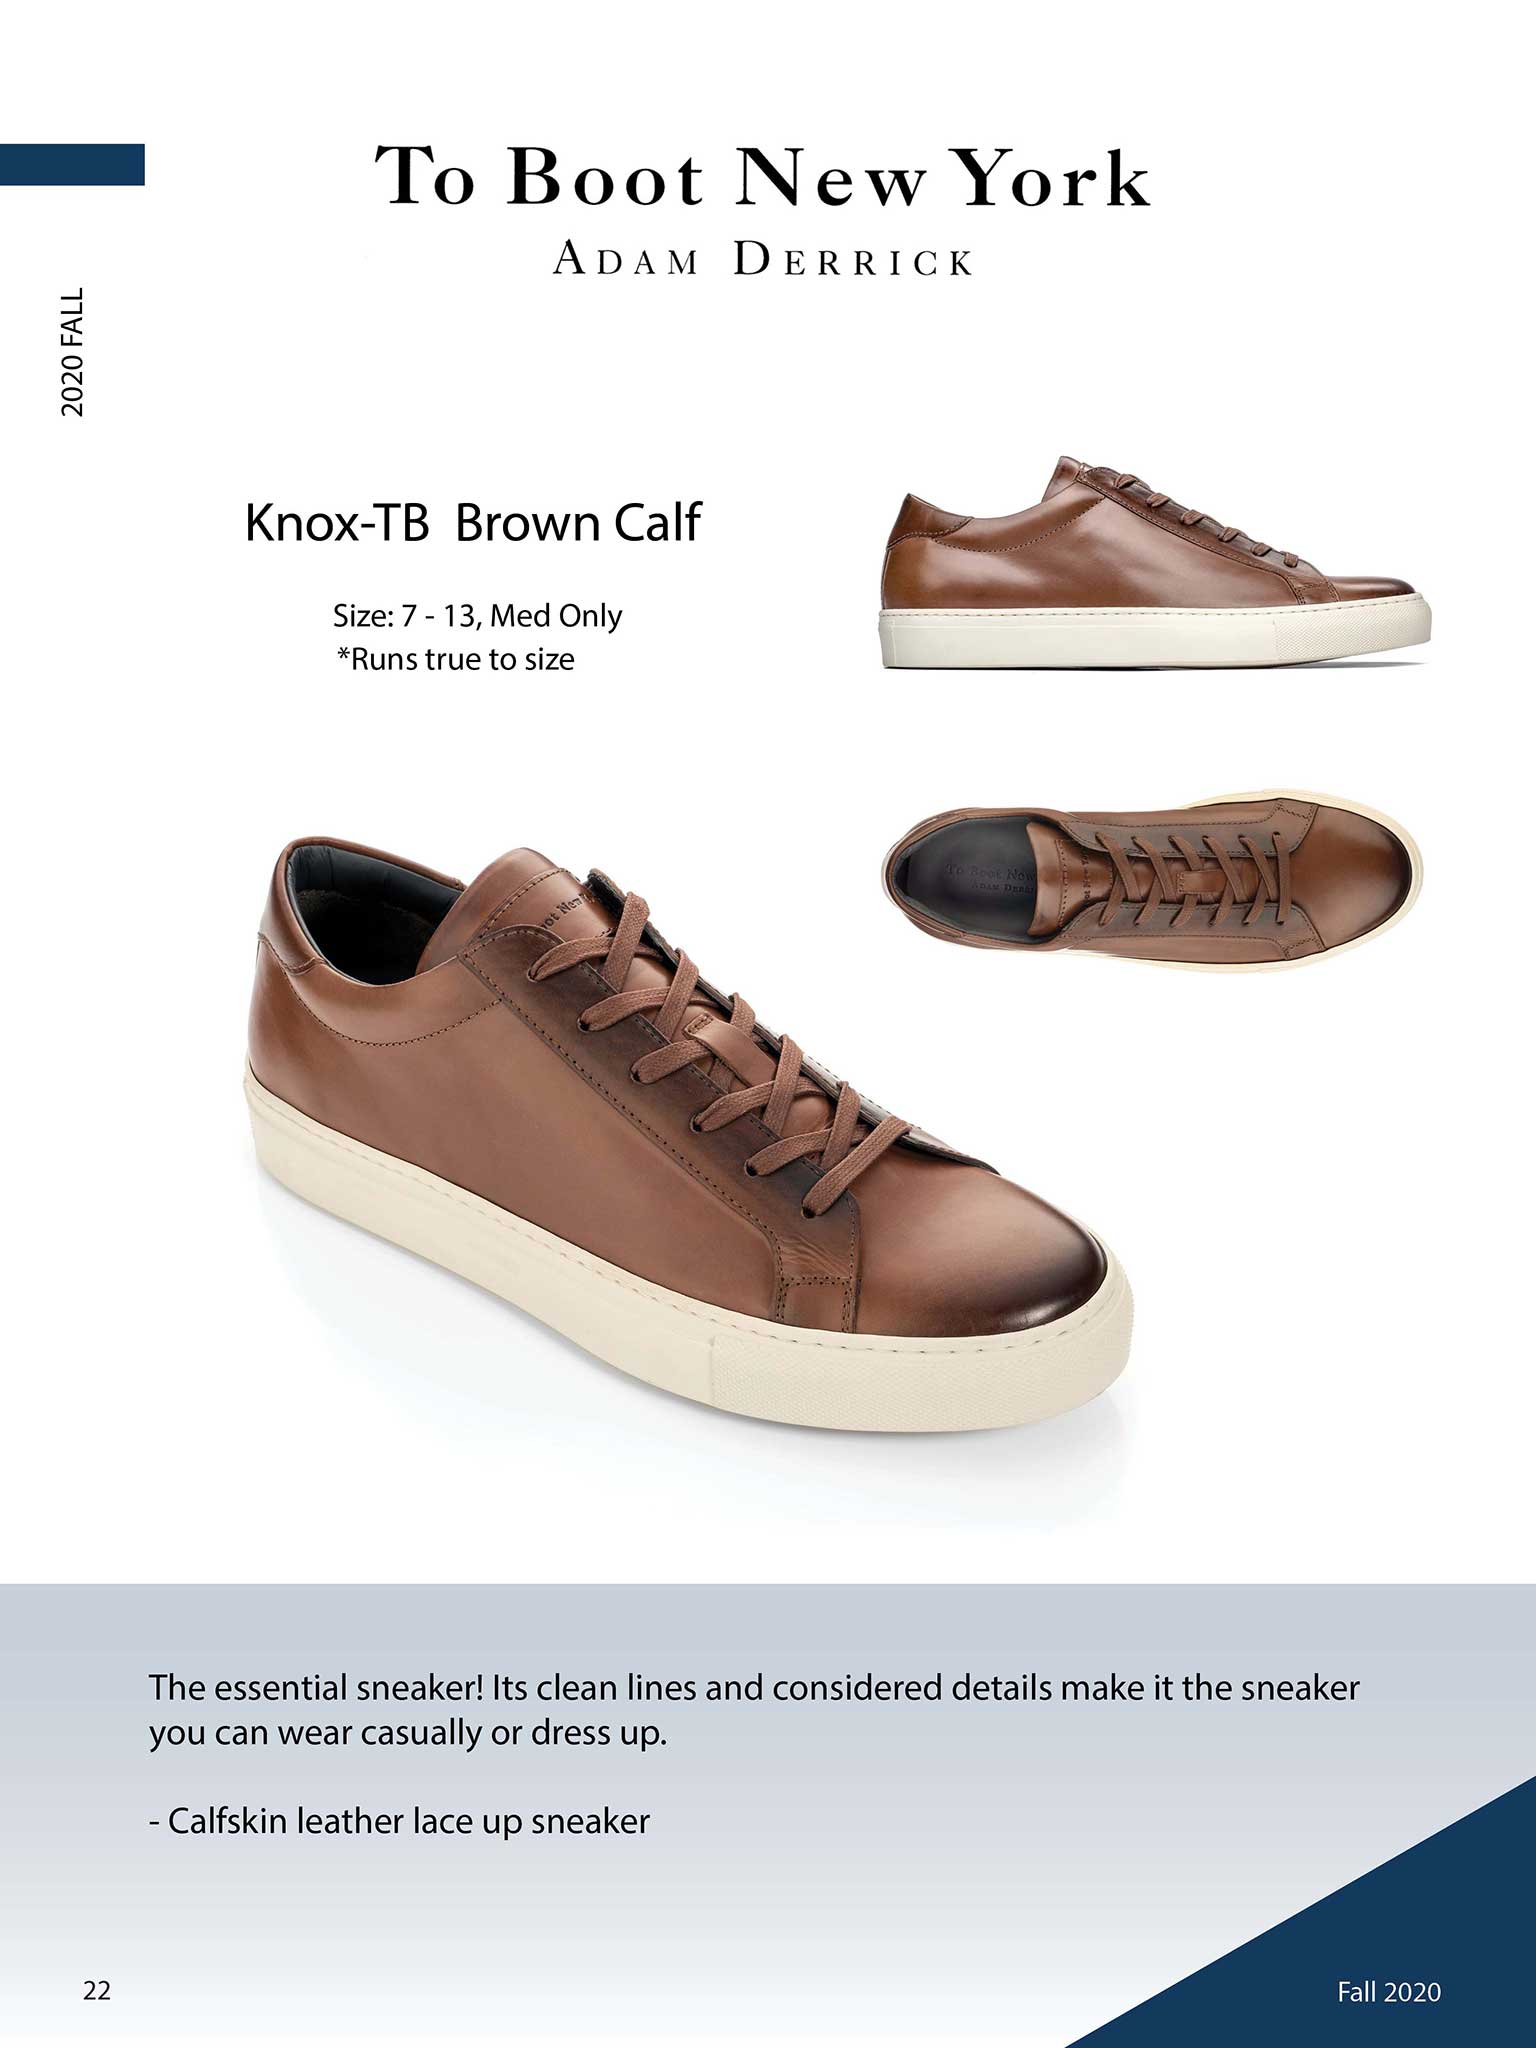 Knox in Brown Calf by To Boot New York